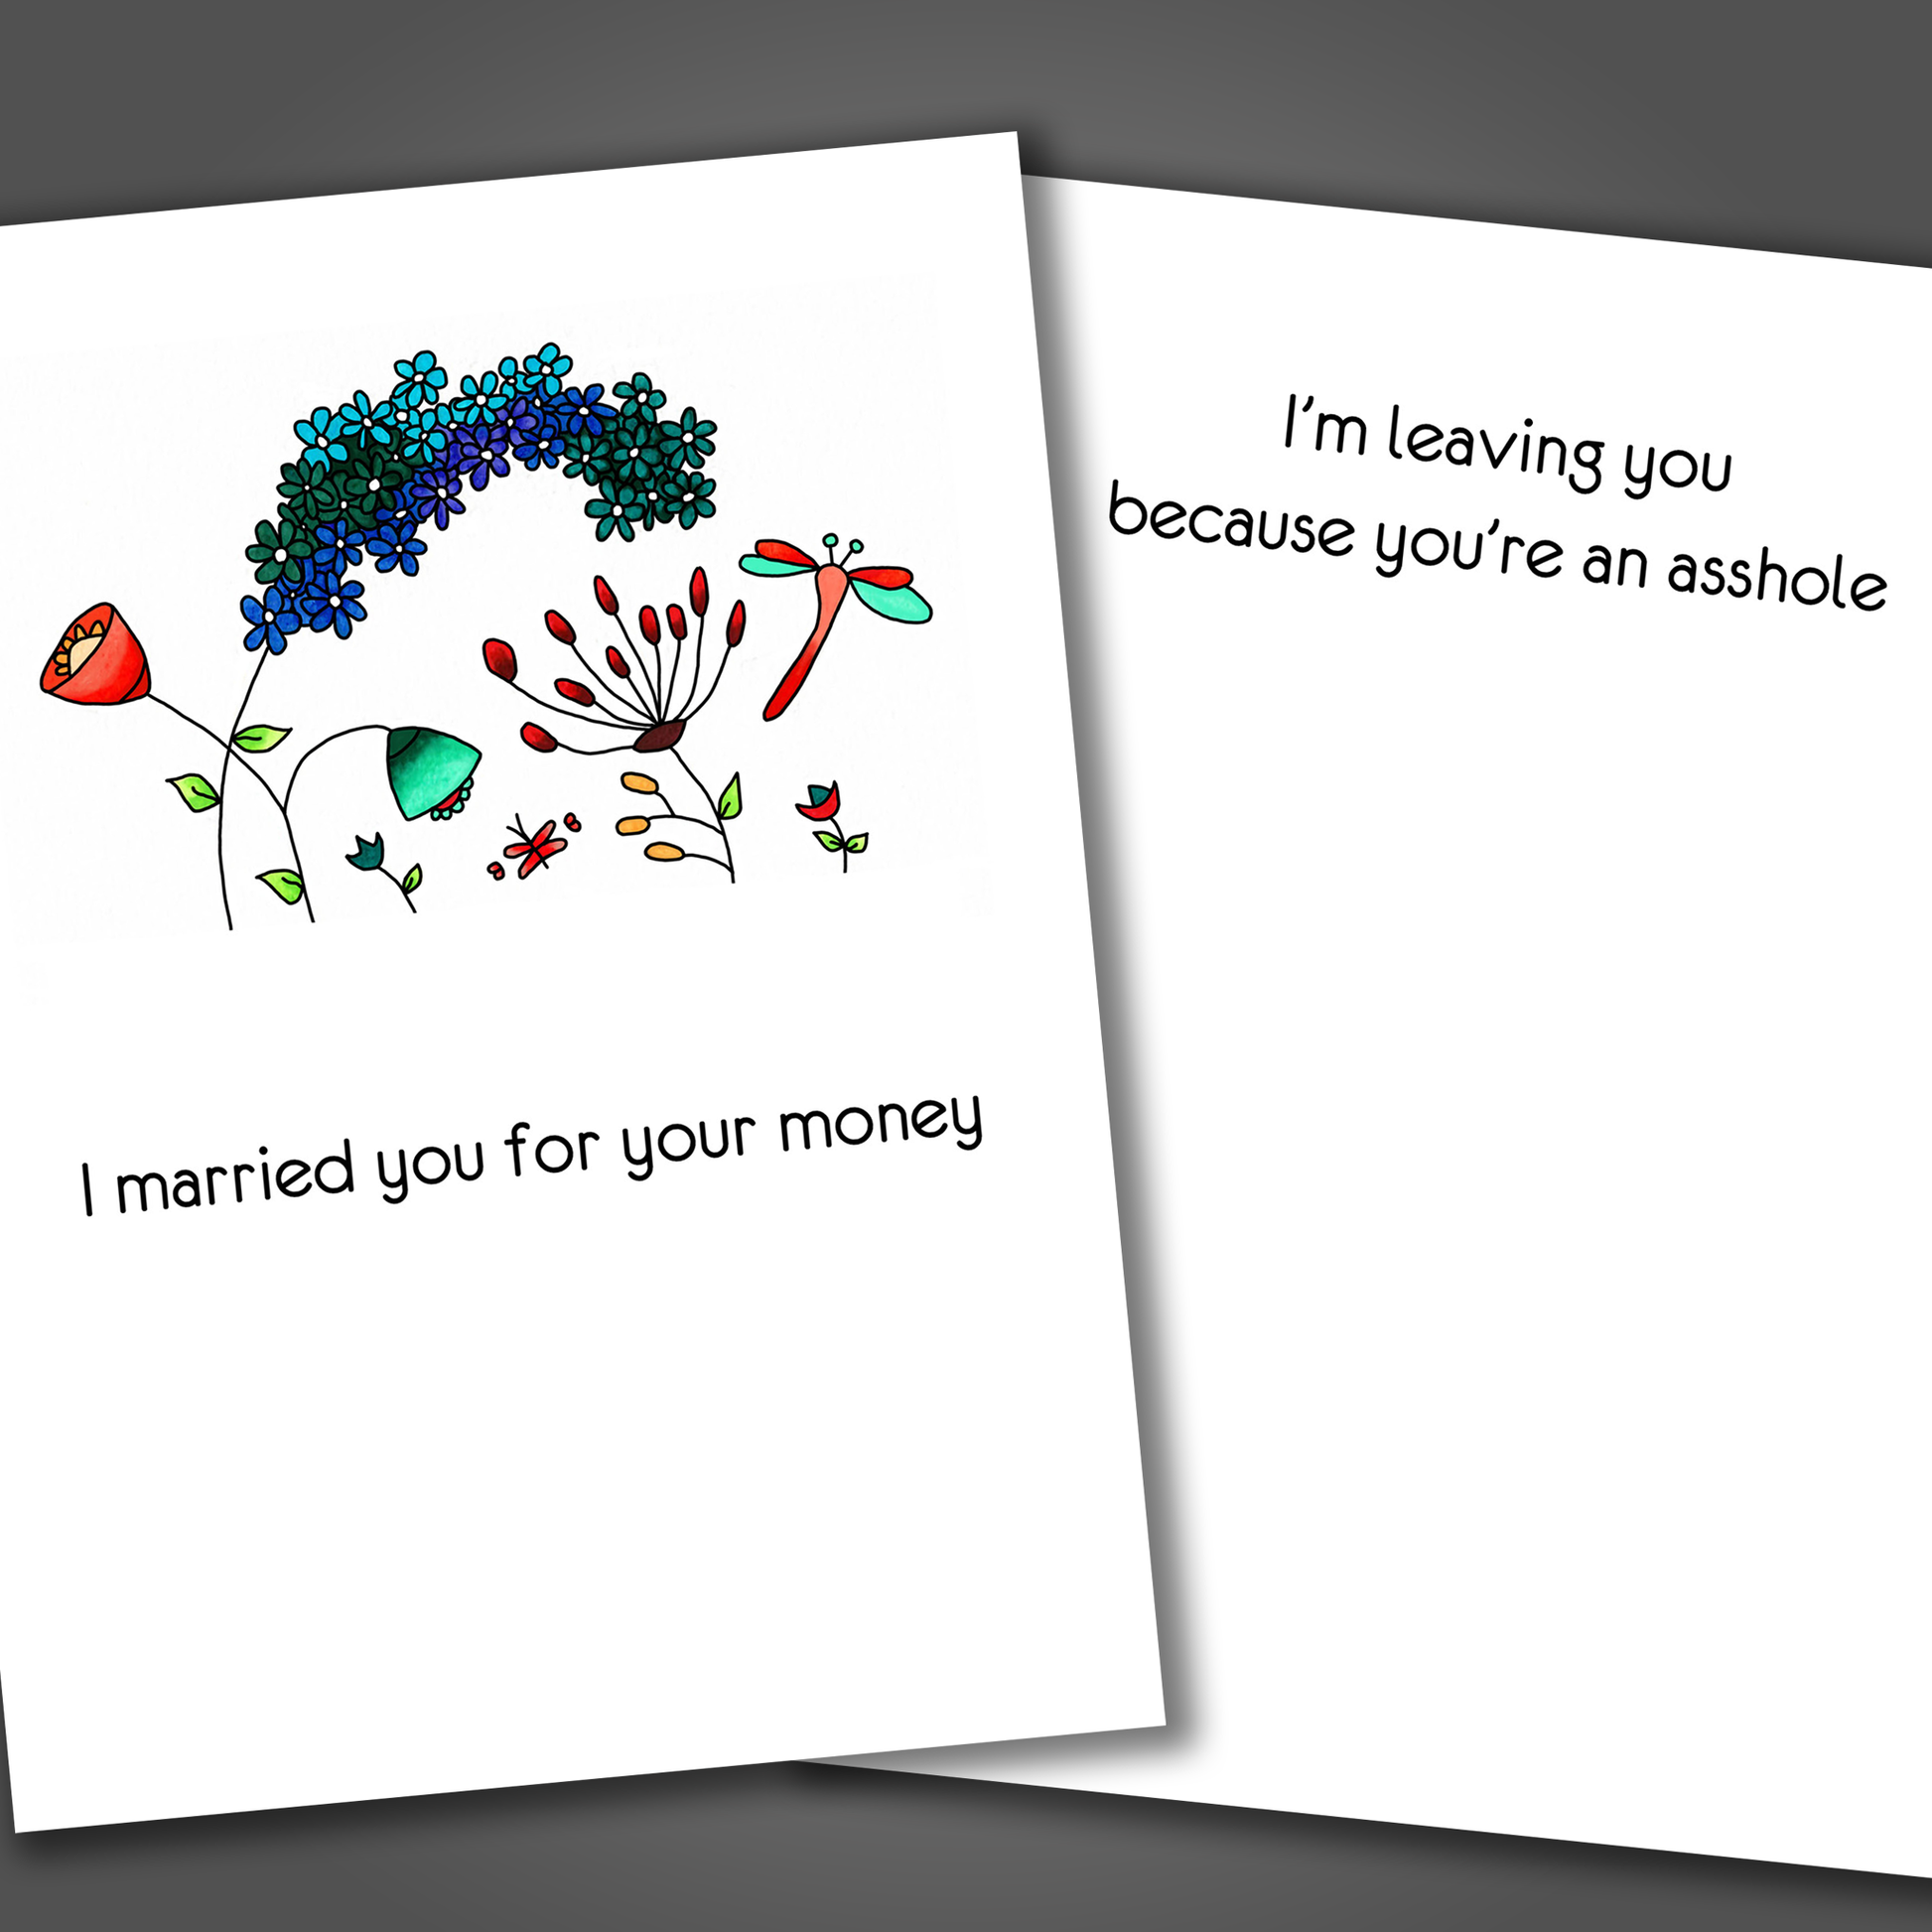 Funny divorce or breaking up card that says I married you for your money on the front. Inside is a funny joke that says I'm leaving because you're an asshole.